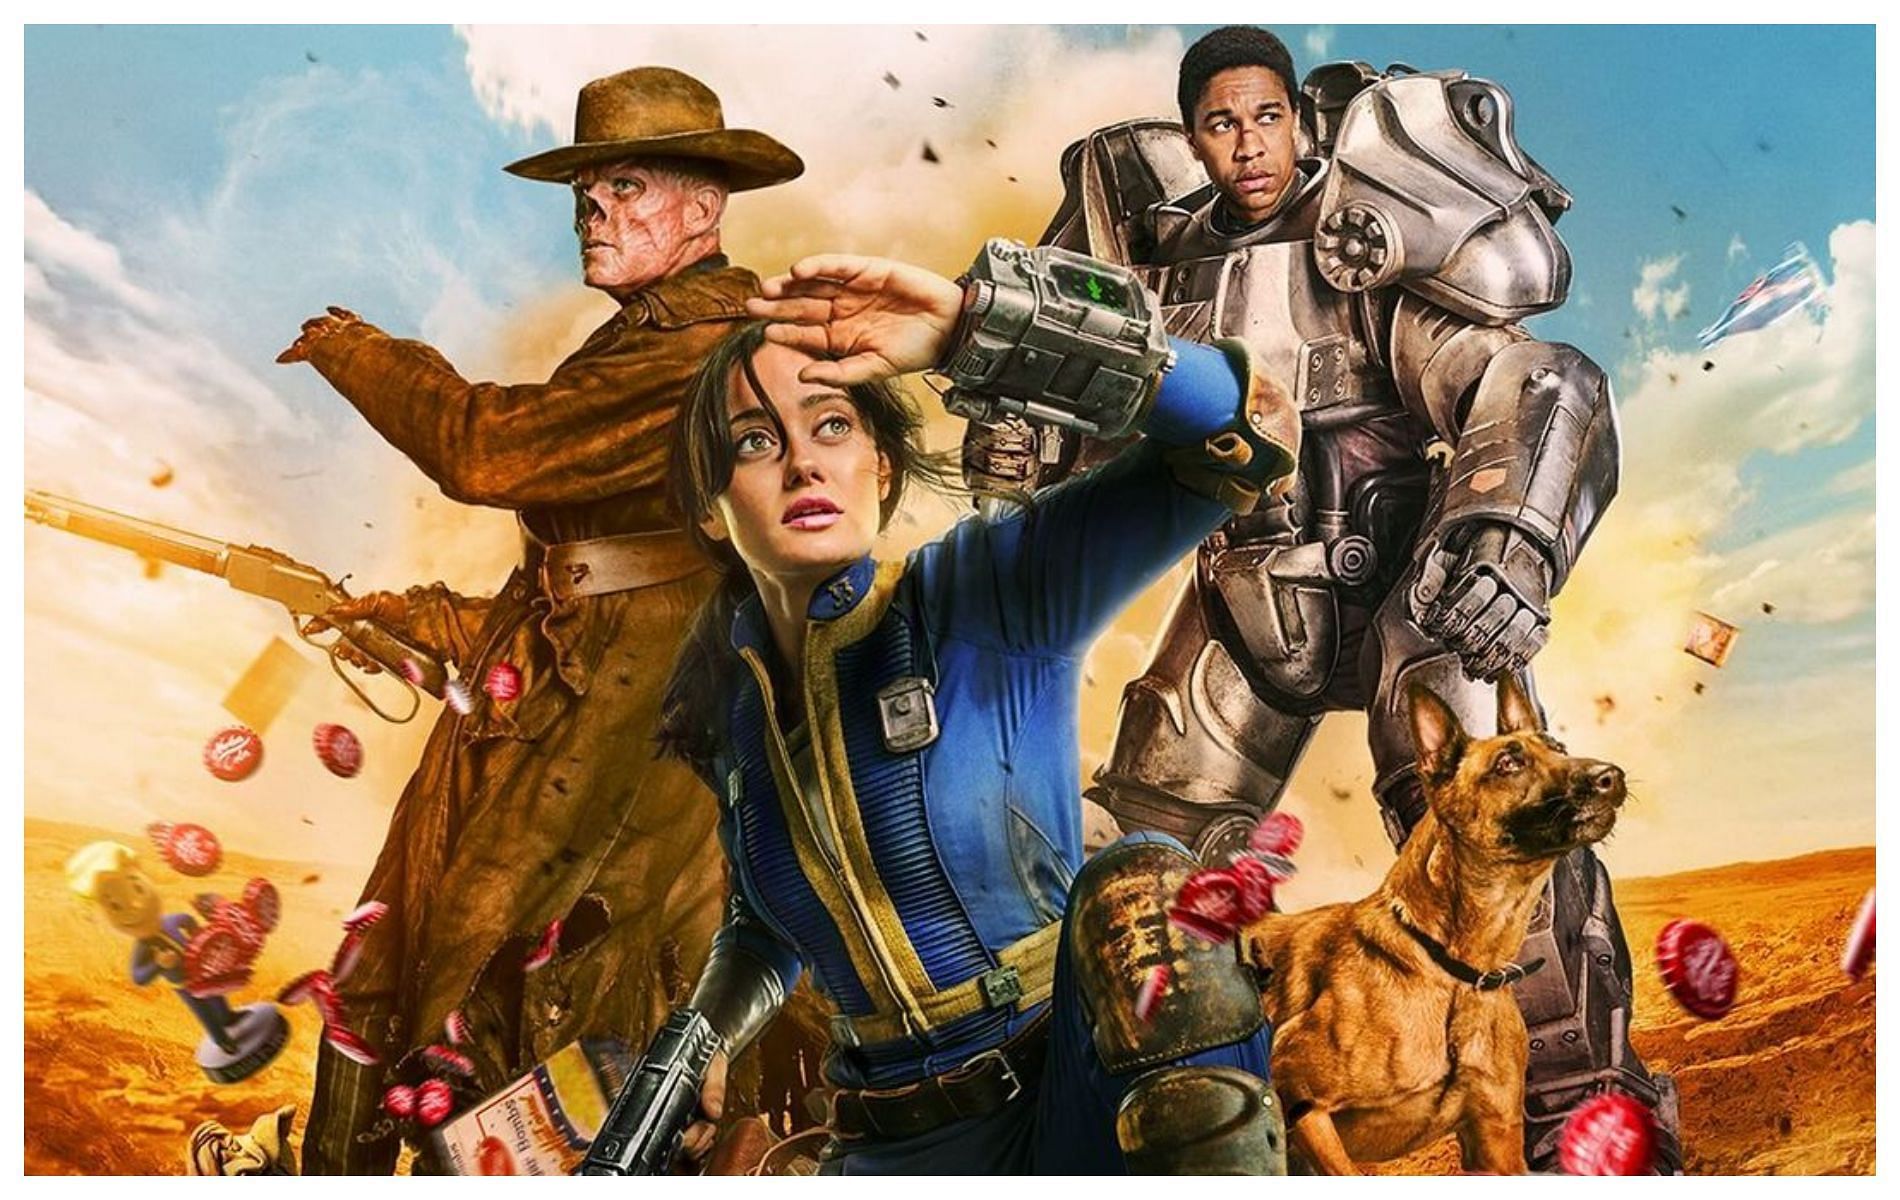 Fallout releases on Amazon Prime in April. (Image via Fallout, Instagram)